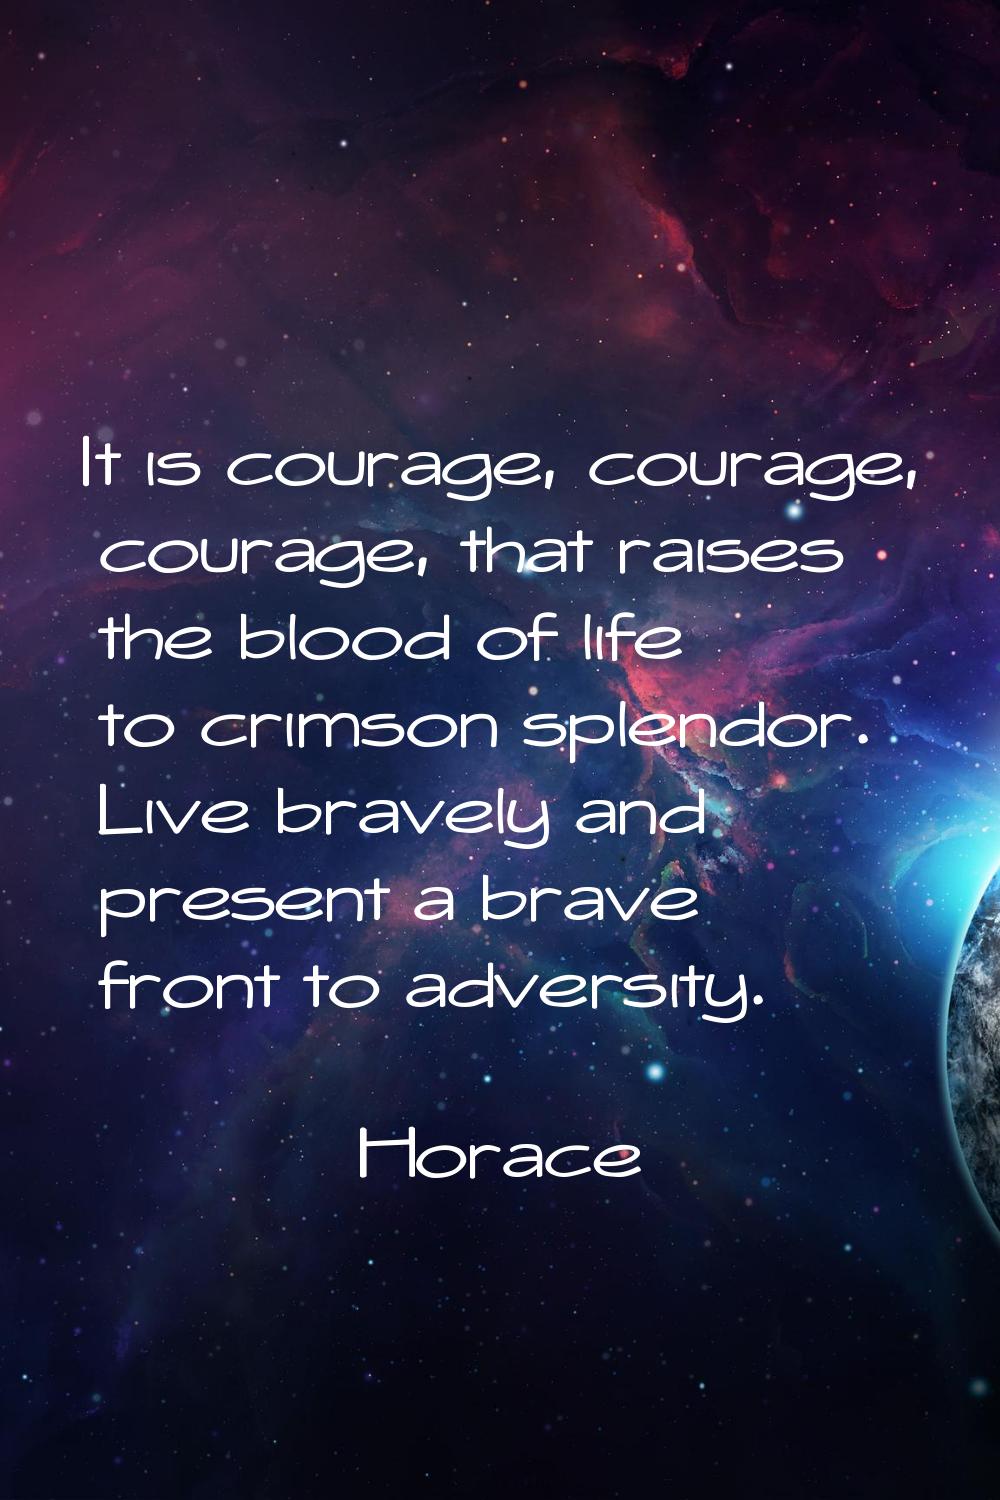 It is courage, courage, courage, that raises the blood of life to crimson splendor. Live bravely an